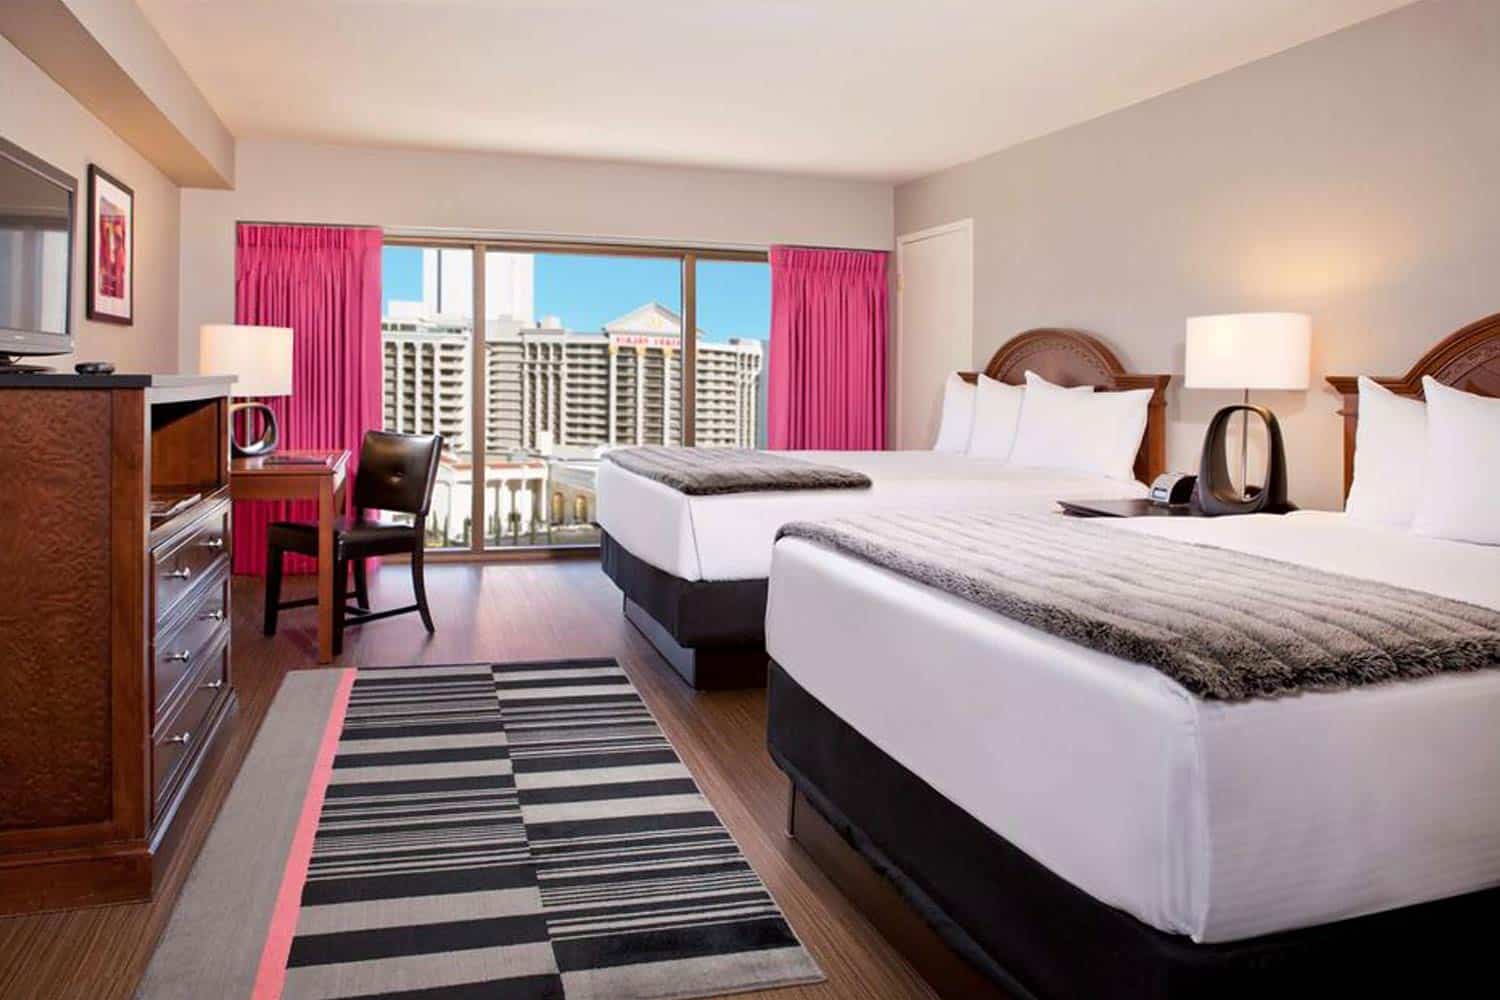 An Honest Review of The Flamingo in Las Vegas - HubPages